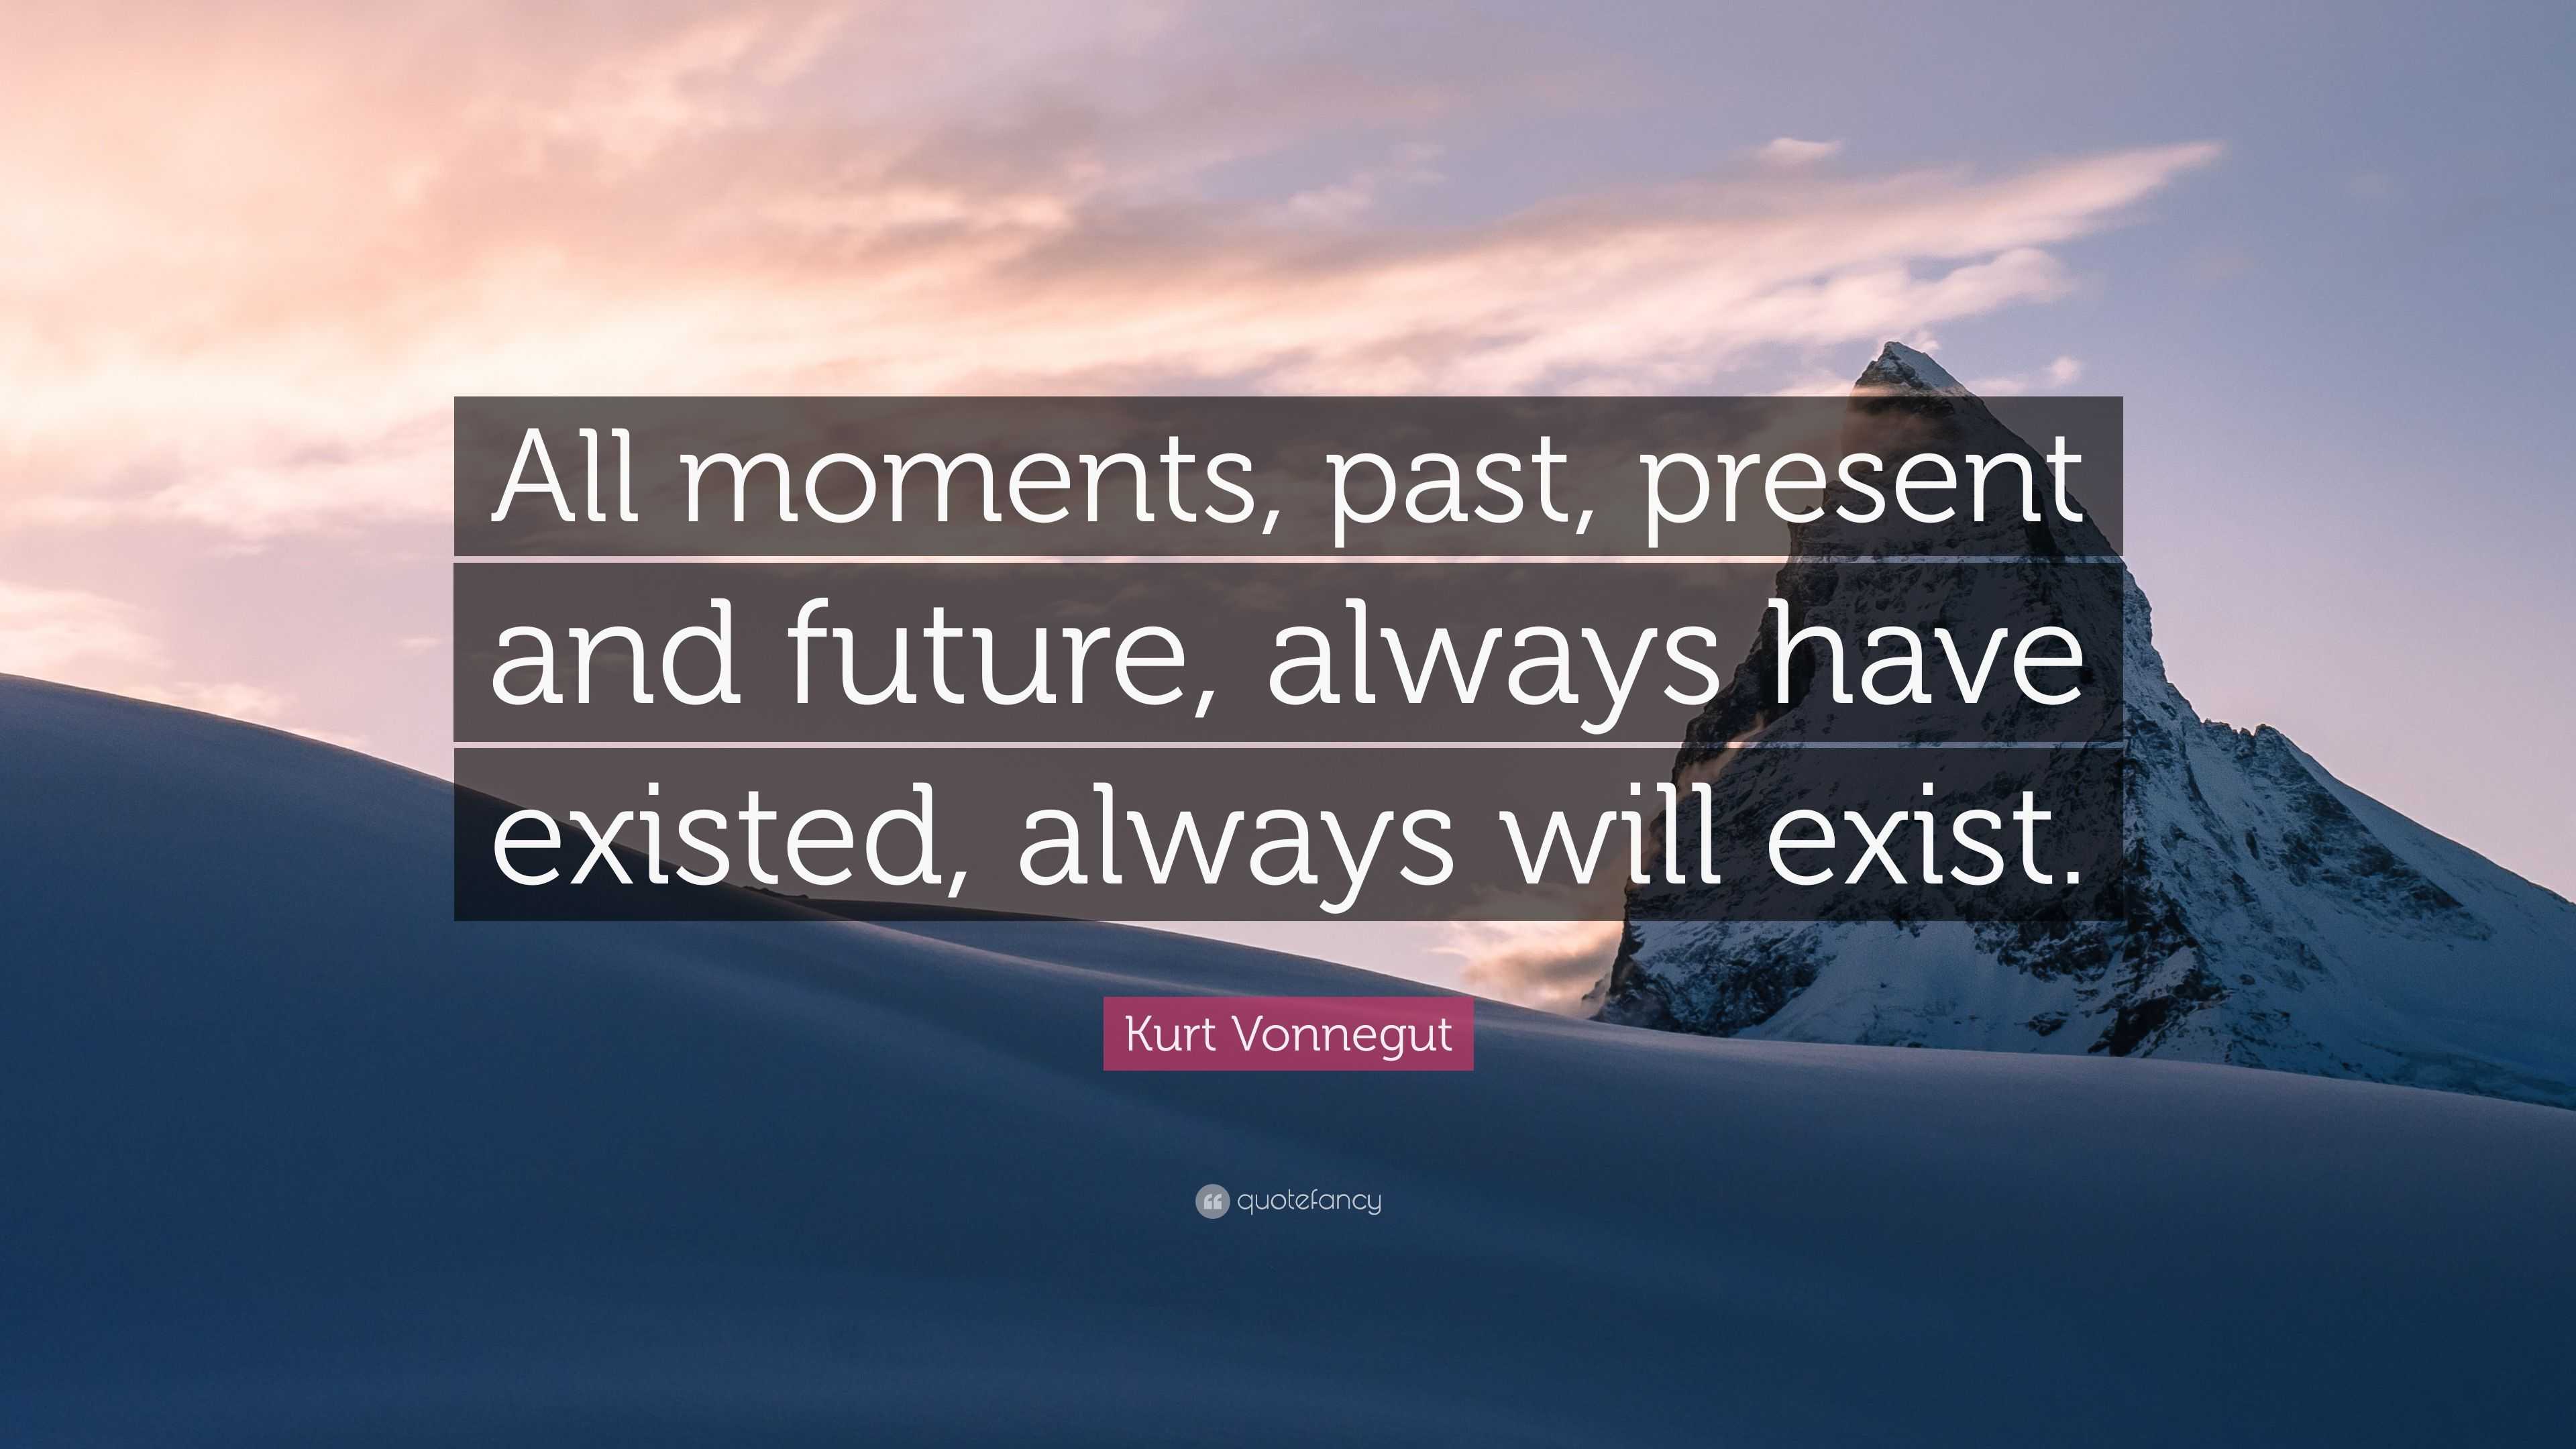 Kurt Vonnegut Quote: “All moments, past, present and future, always ...